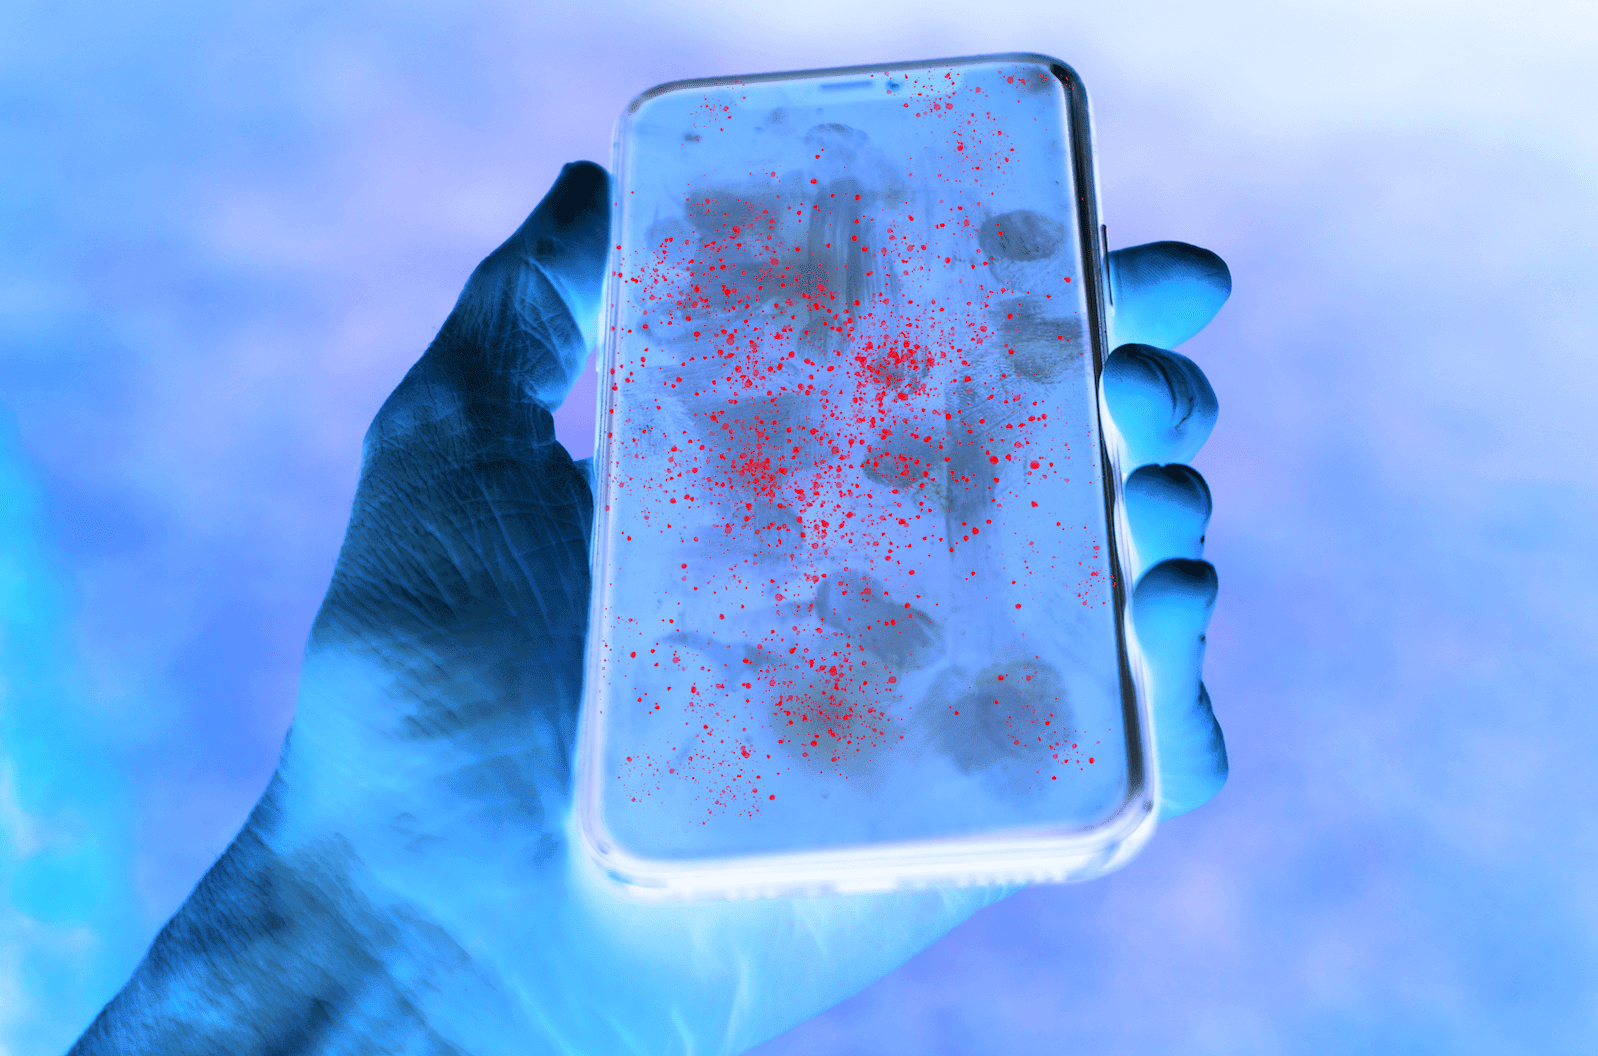 Don't Let Mobile Computers Mobilize Germs, Too